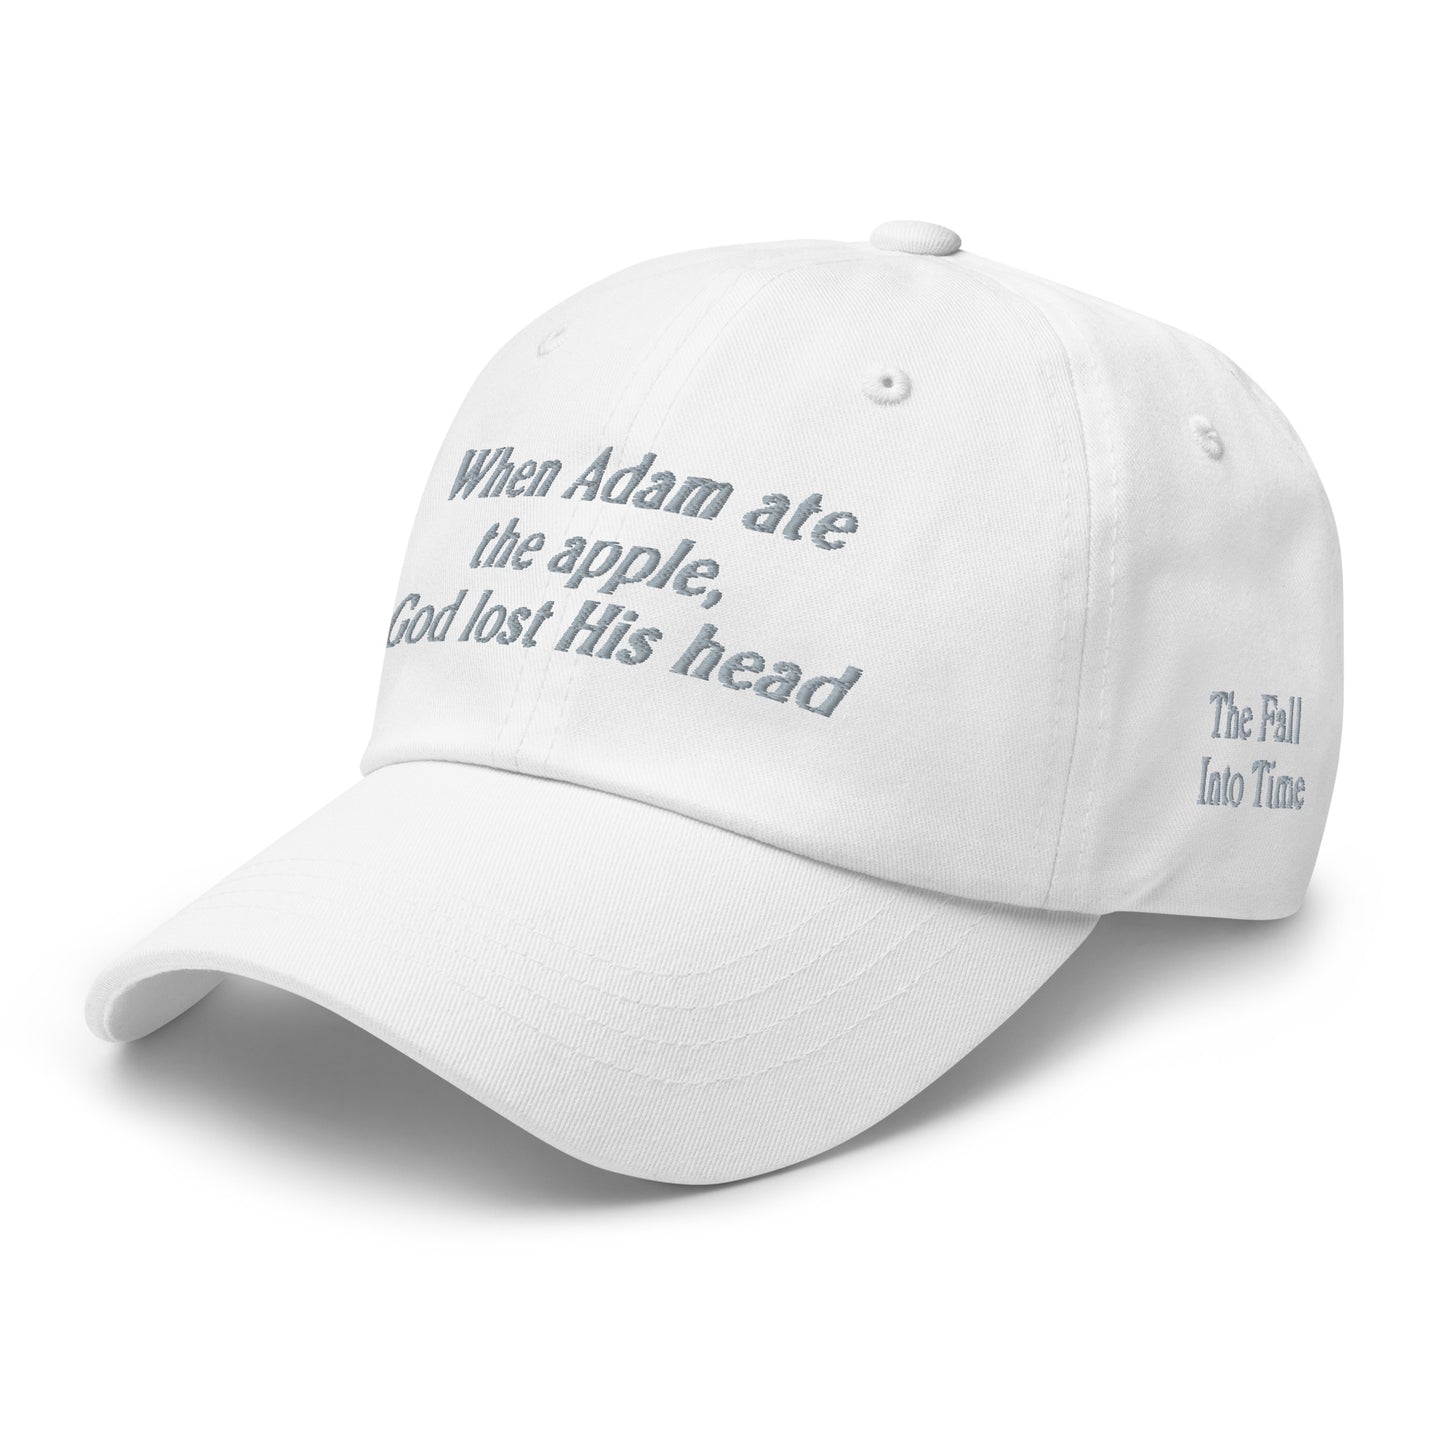 [02a] the official CIORAN HEAD hat (but in white)